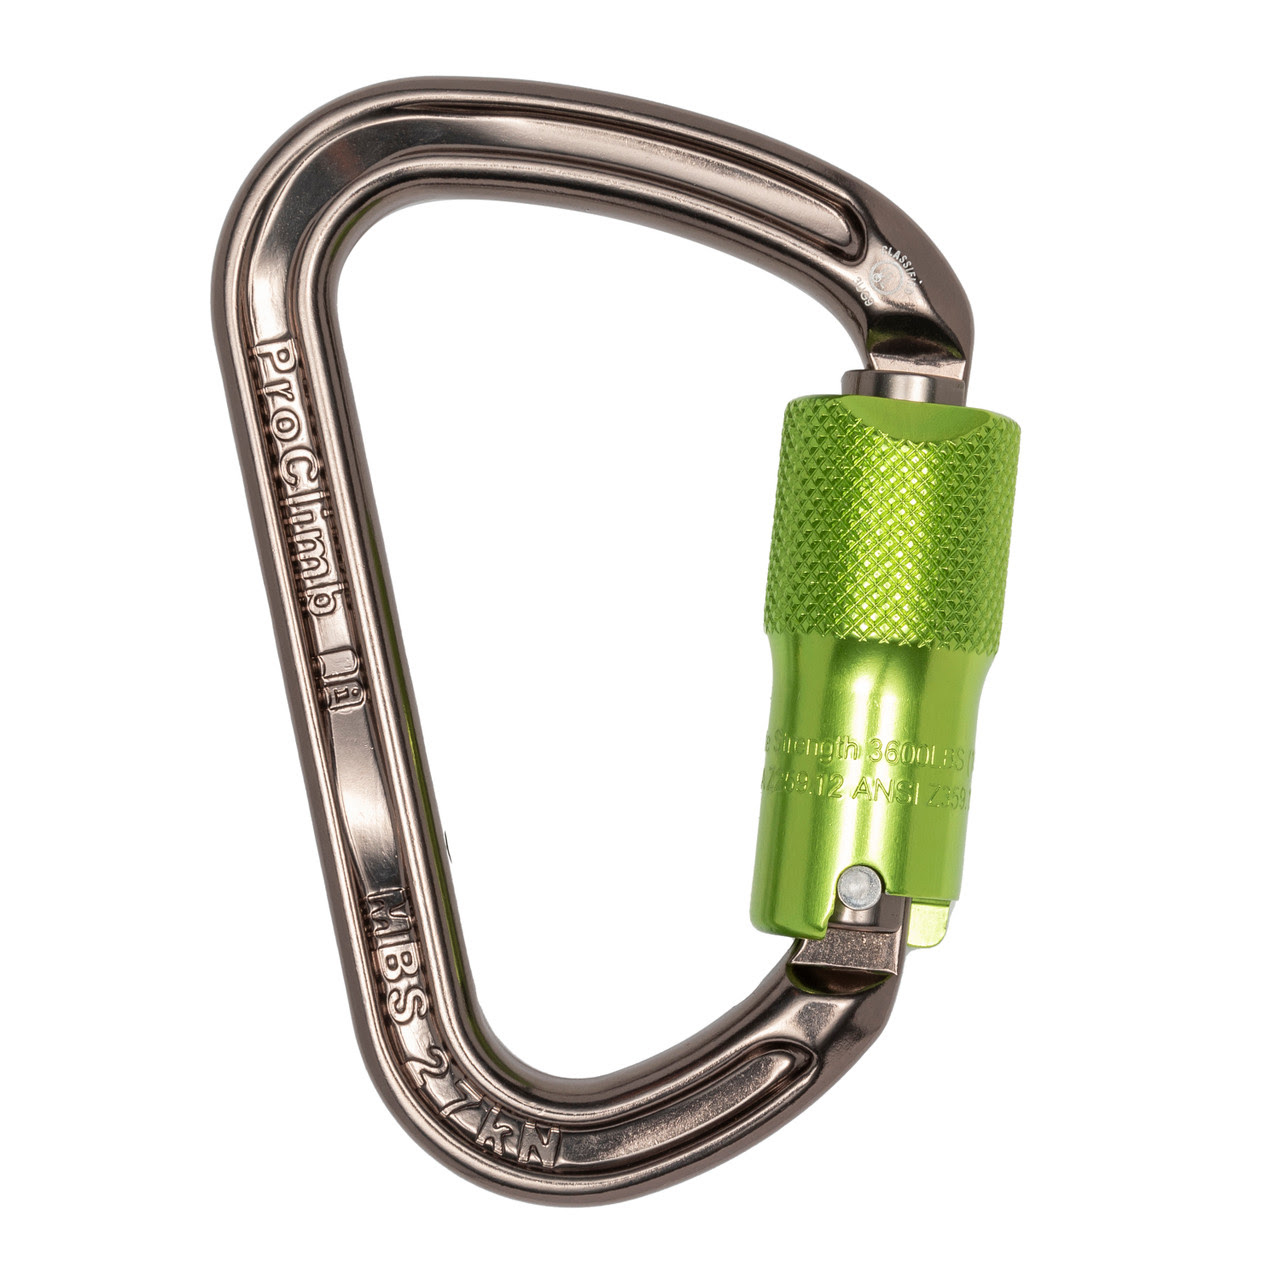 Triple Lock I-Beamer Carabiner from Columbia Safety